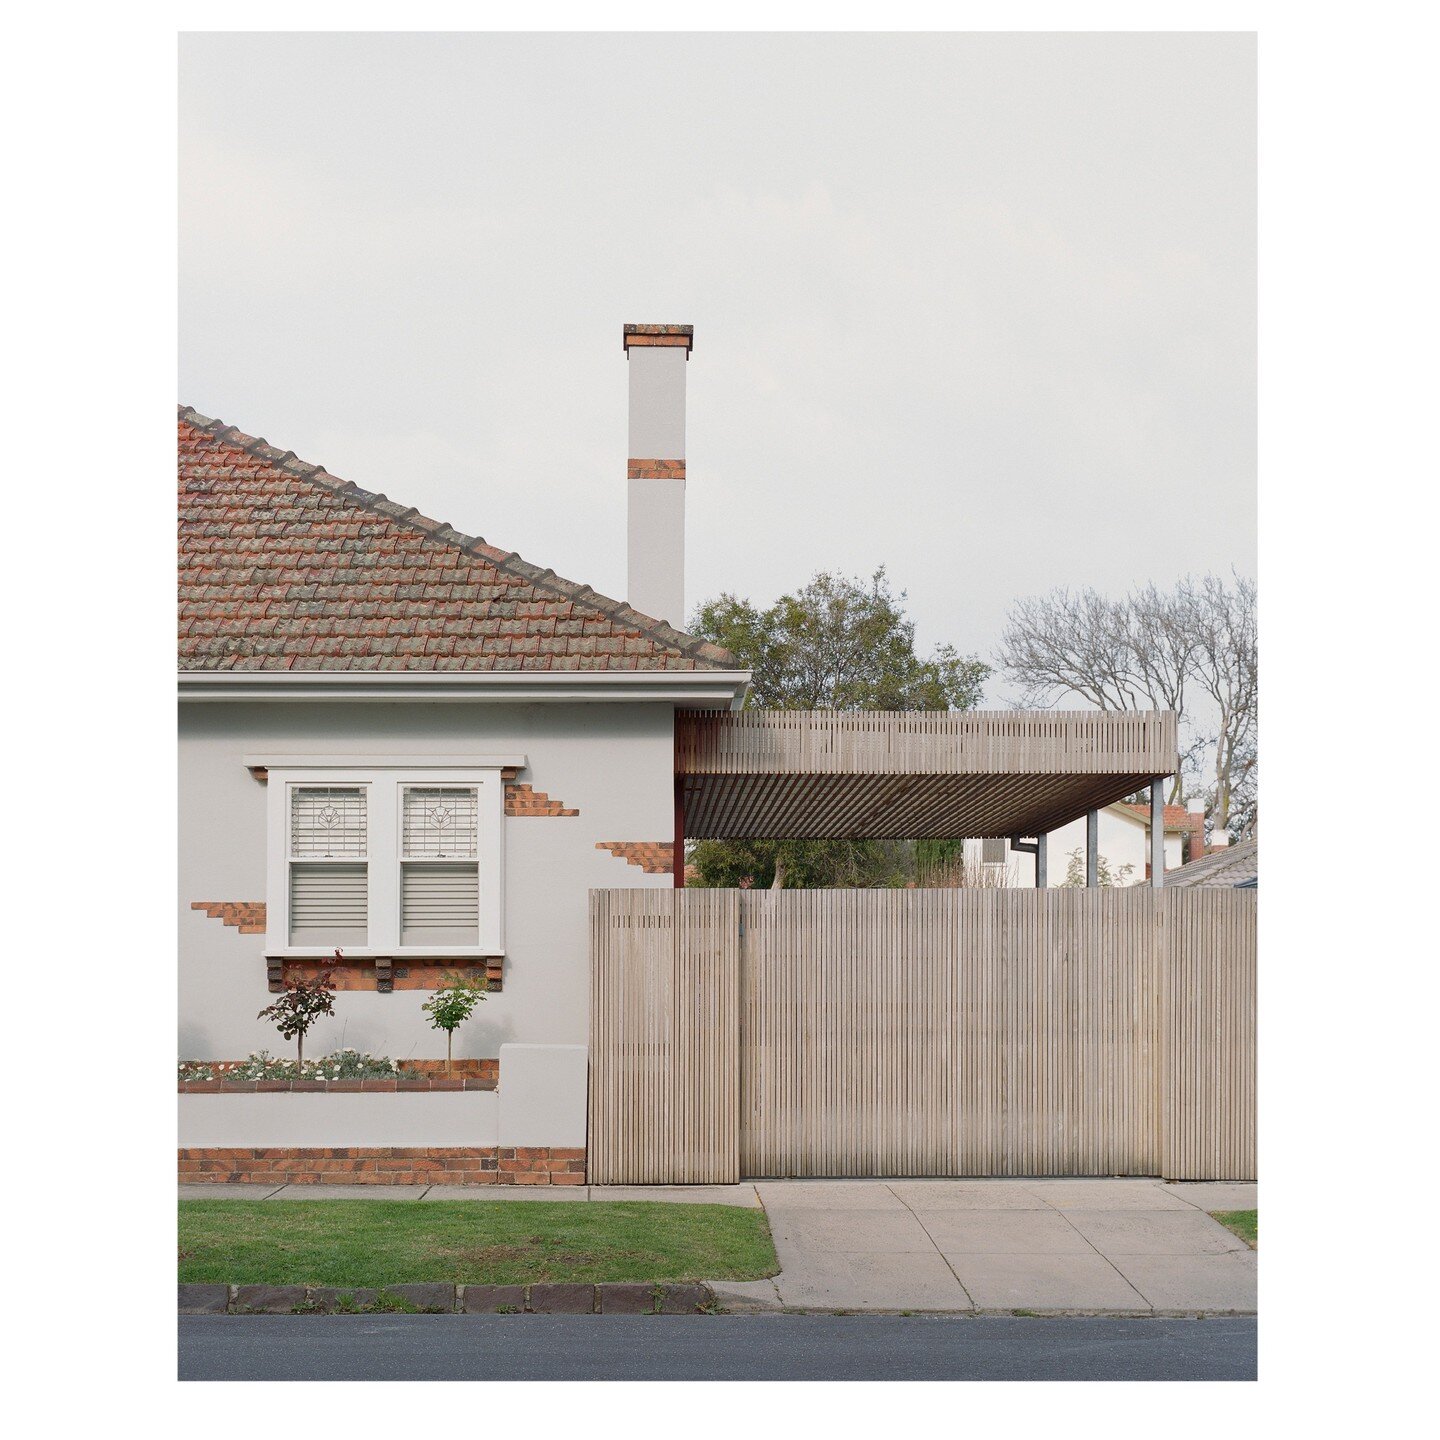 Gardenvale, from the street and from the rear garden . The front elevation's period detailing is restored, and flanked by a new batten fence + carport - a counterpoint to the solid brick house. The eastern wall onto the rear garden is completely rebu